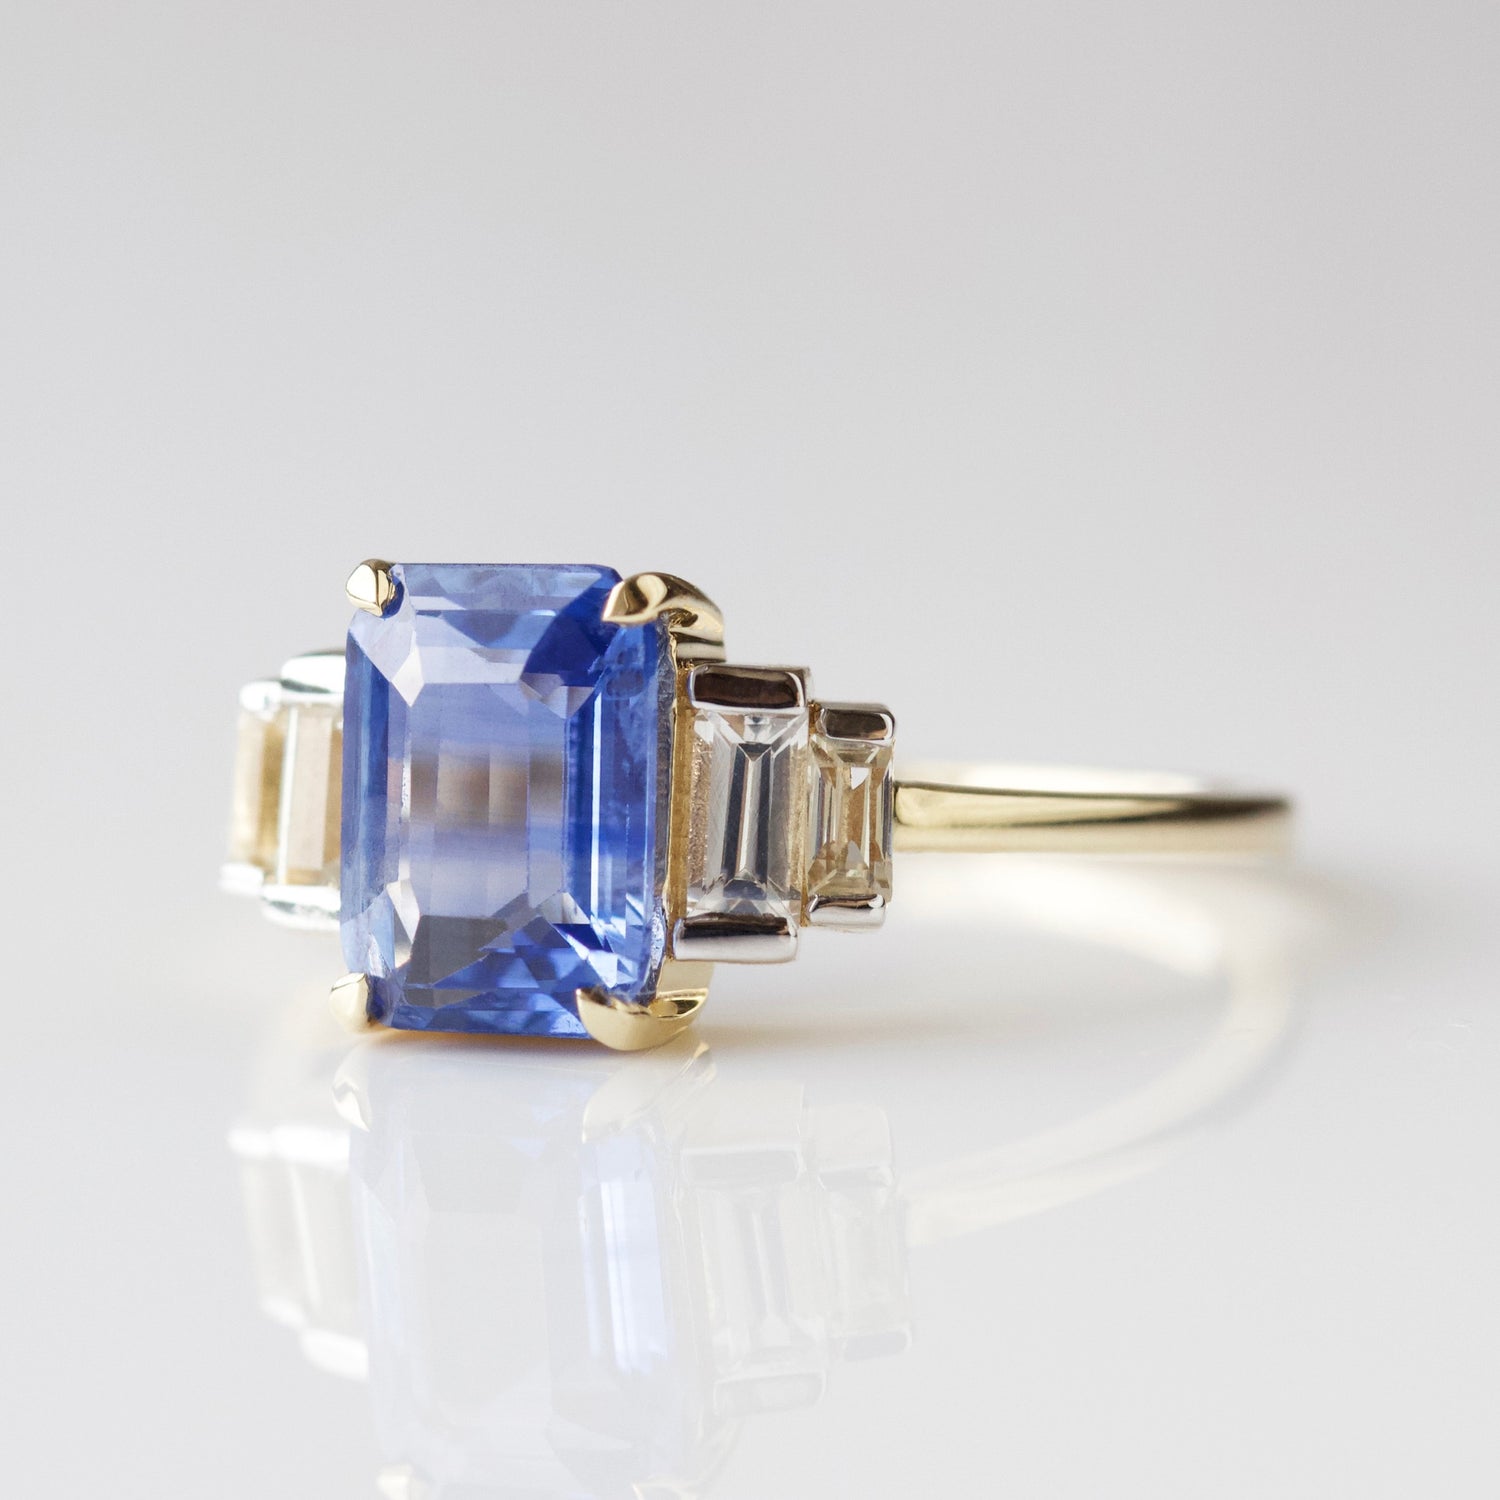 Blue and White sapphire engagement ring in solid gold